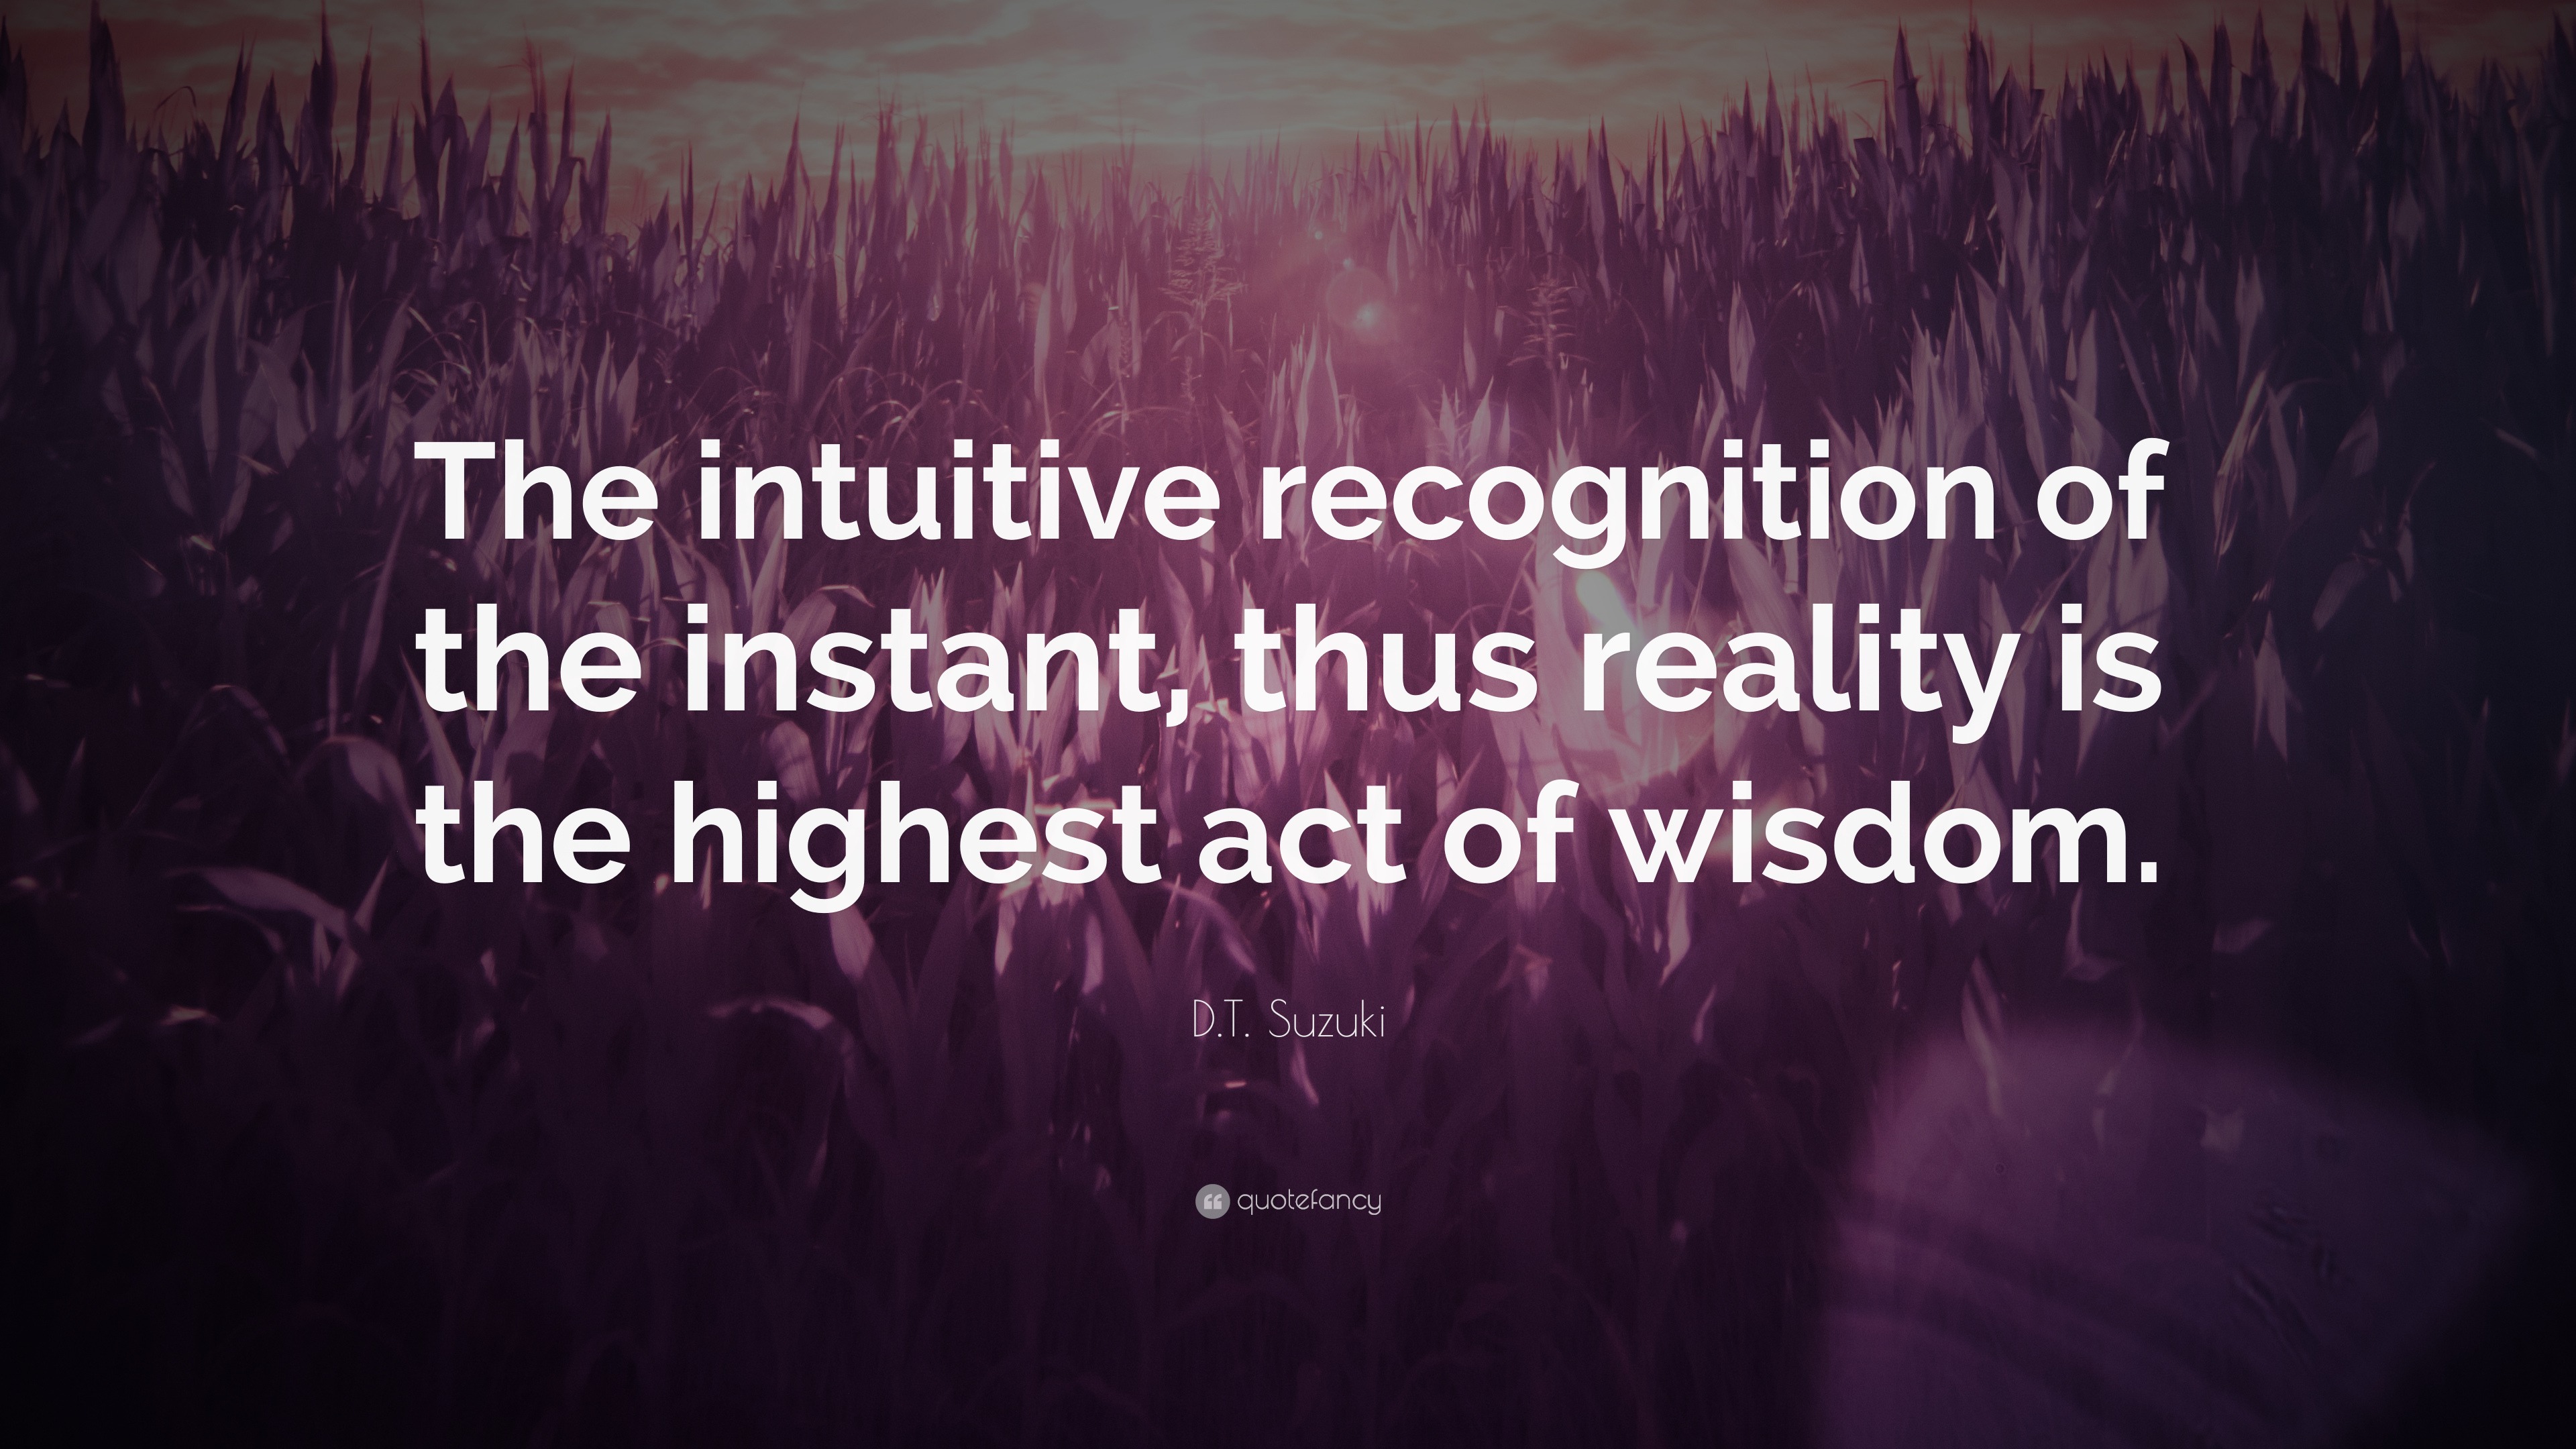 D.T. Suzuki Quote: “The intuitive recognition of the instant, thus